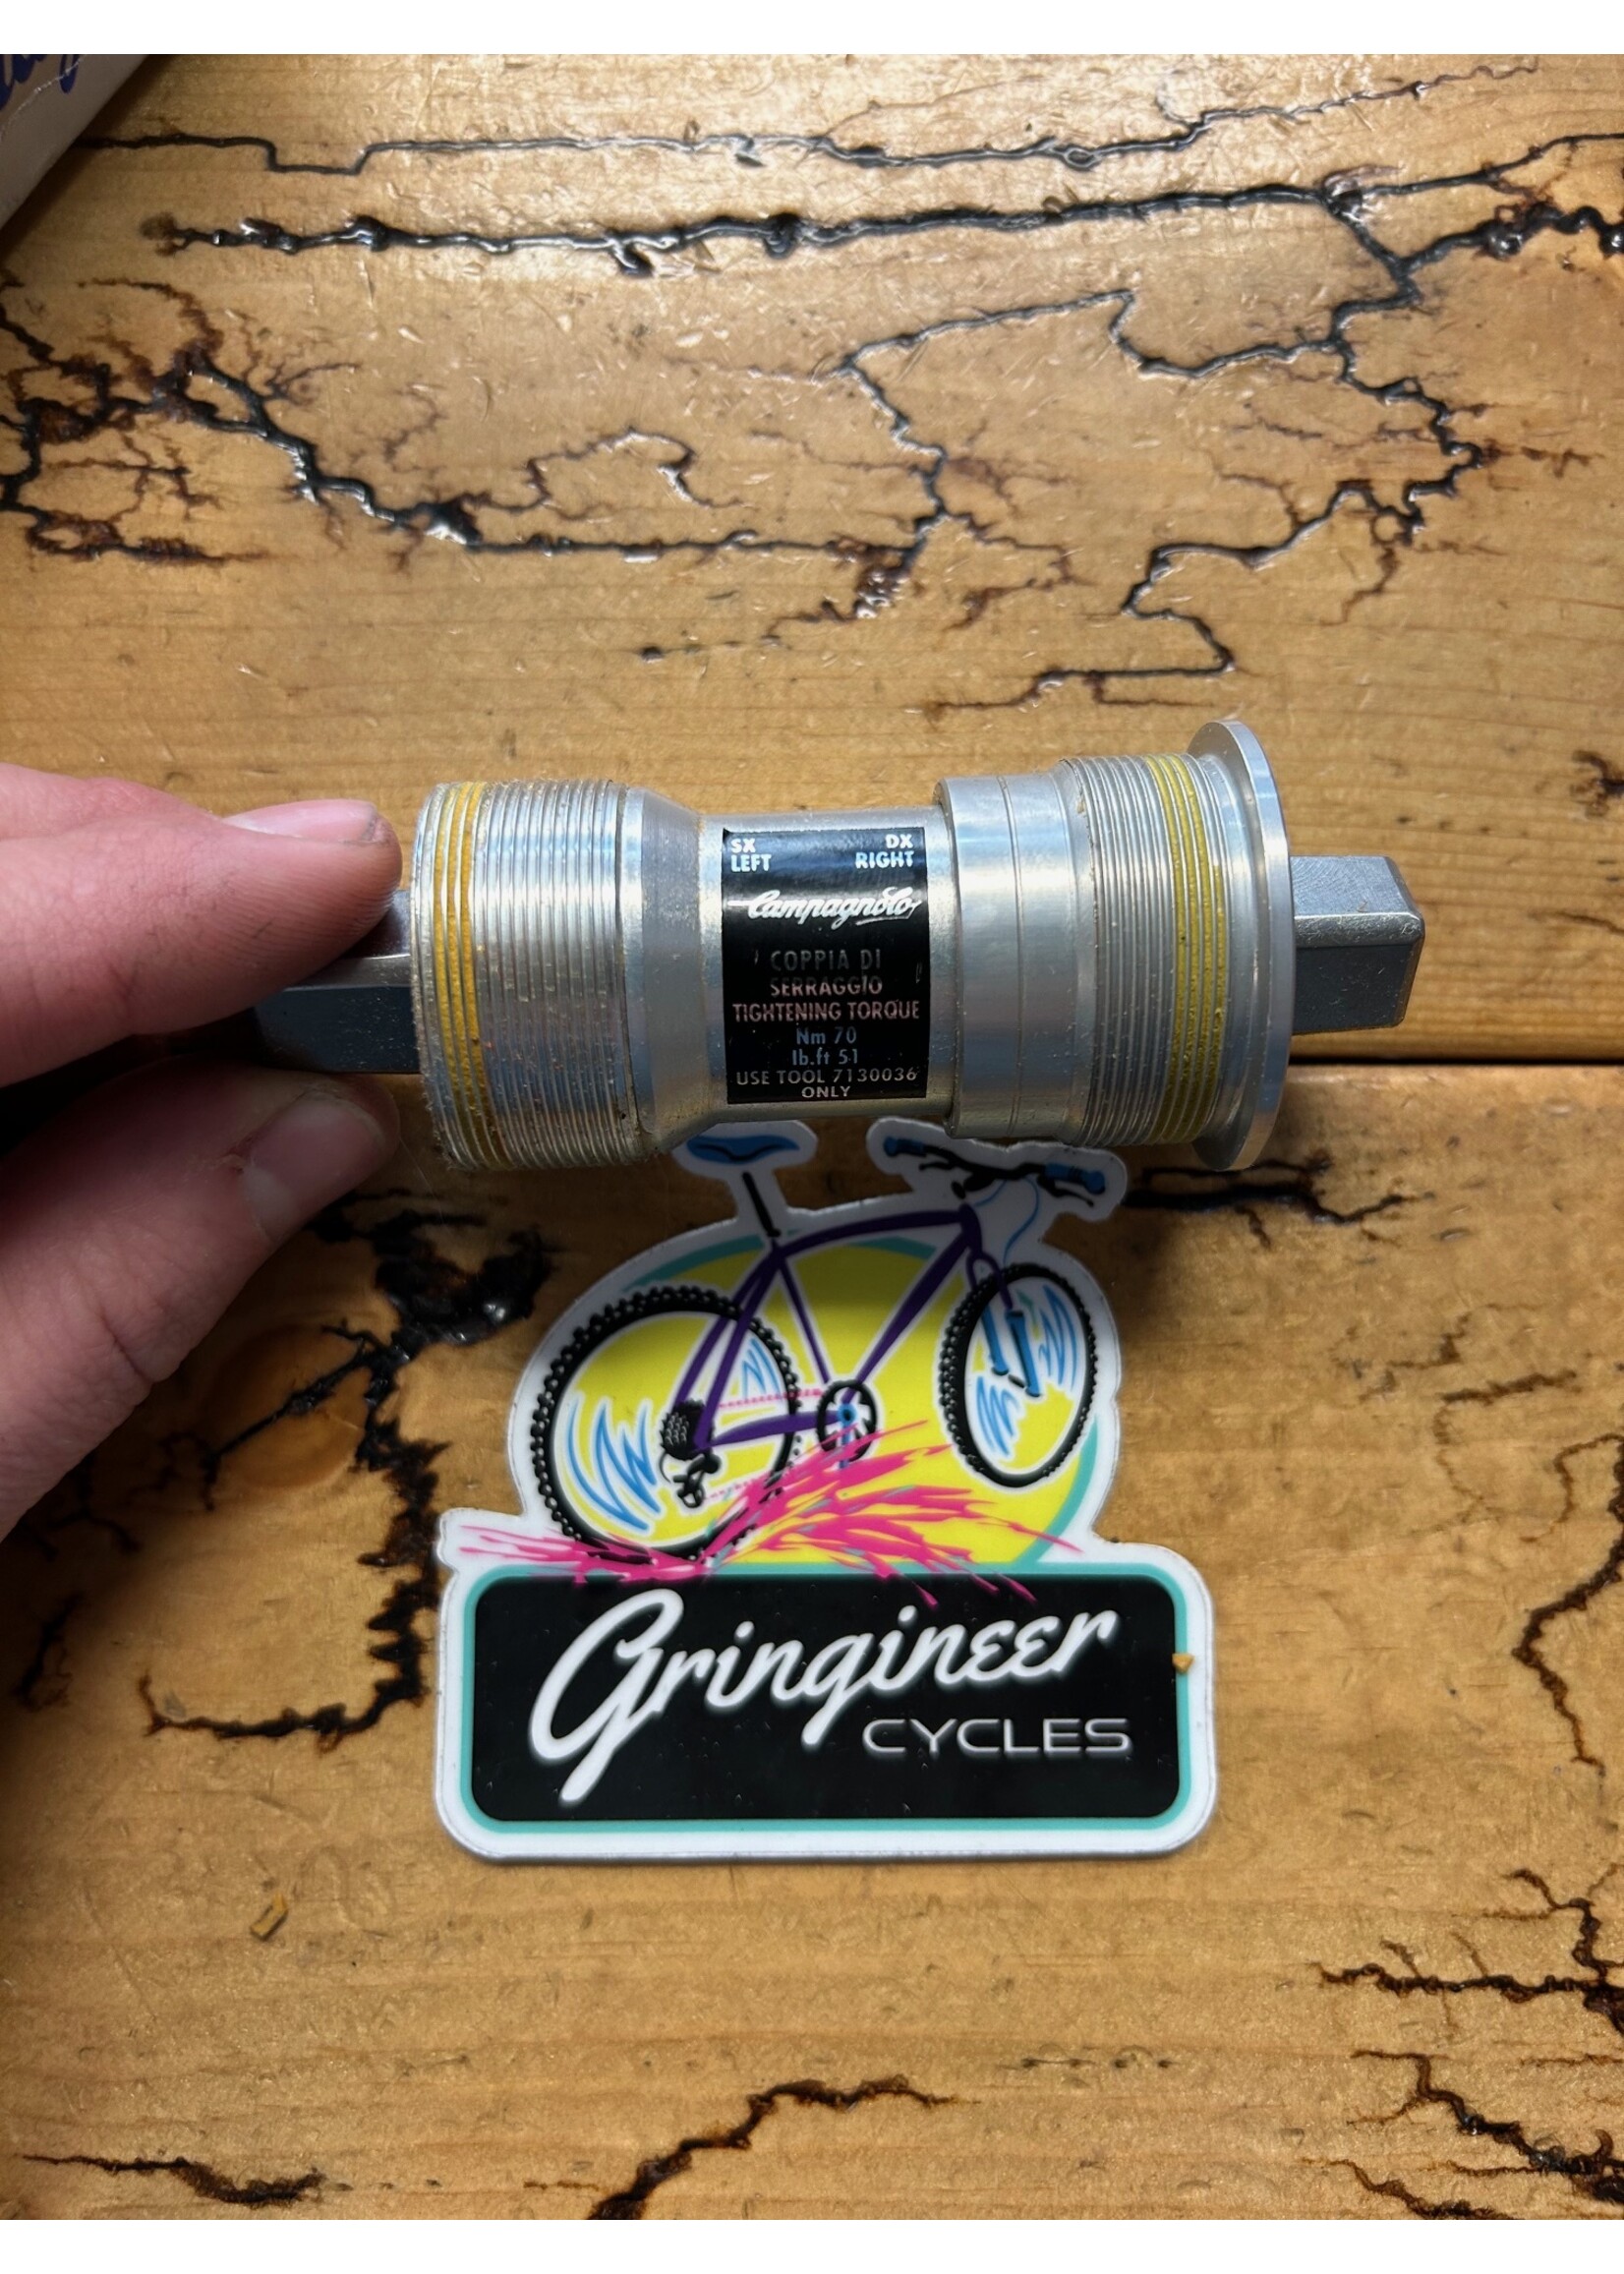 Campagnolo Campagnolo Chorus 102mm English Threaded Square Taper Bottom Bracket NOS